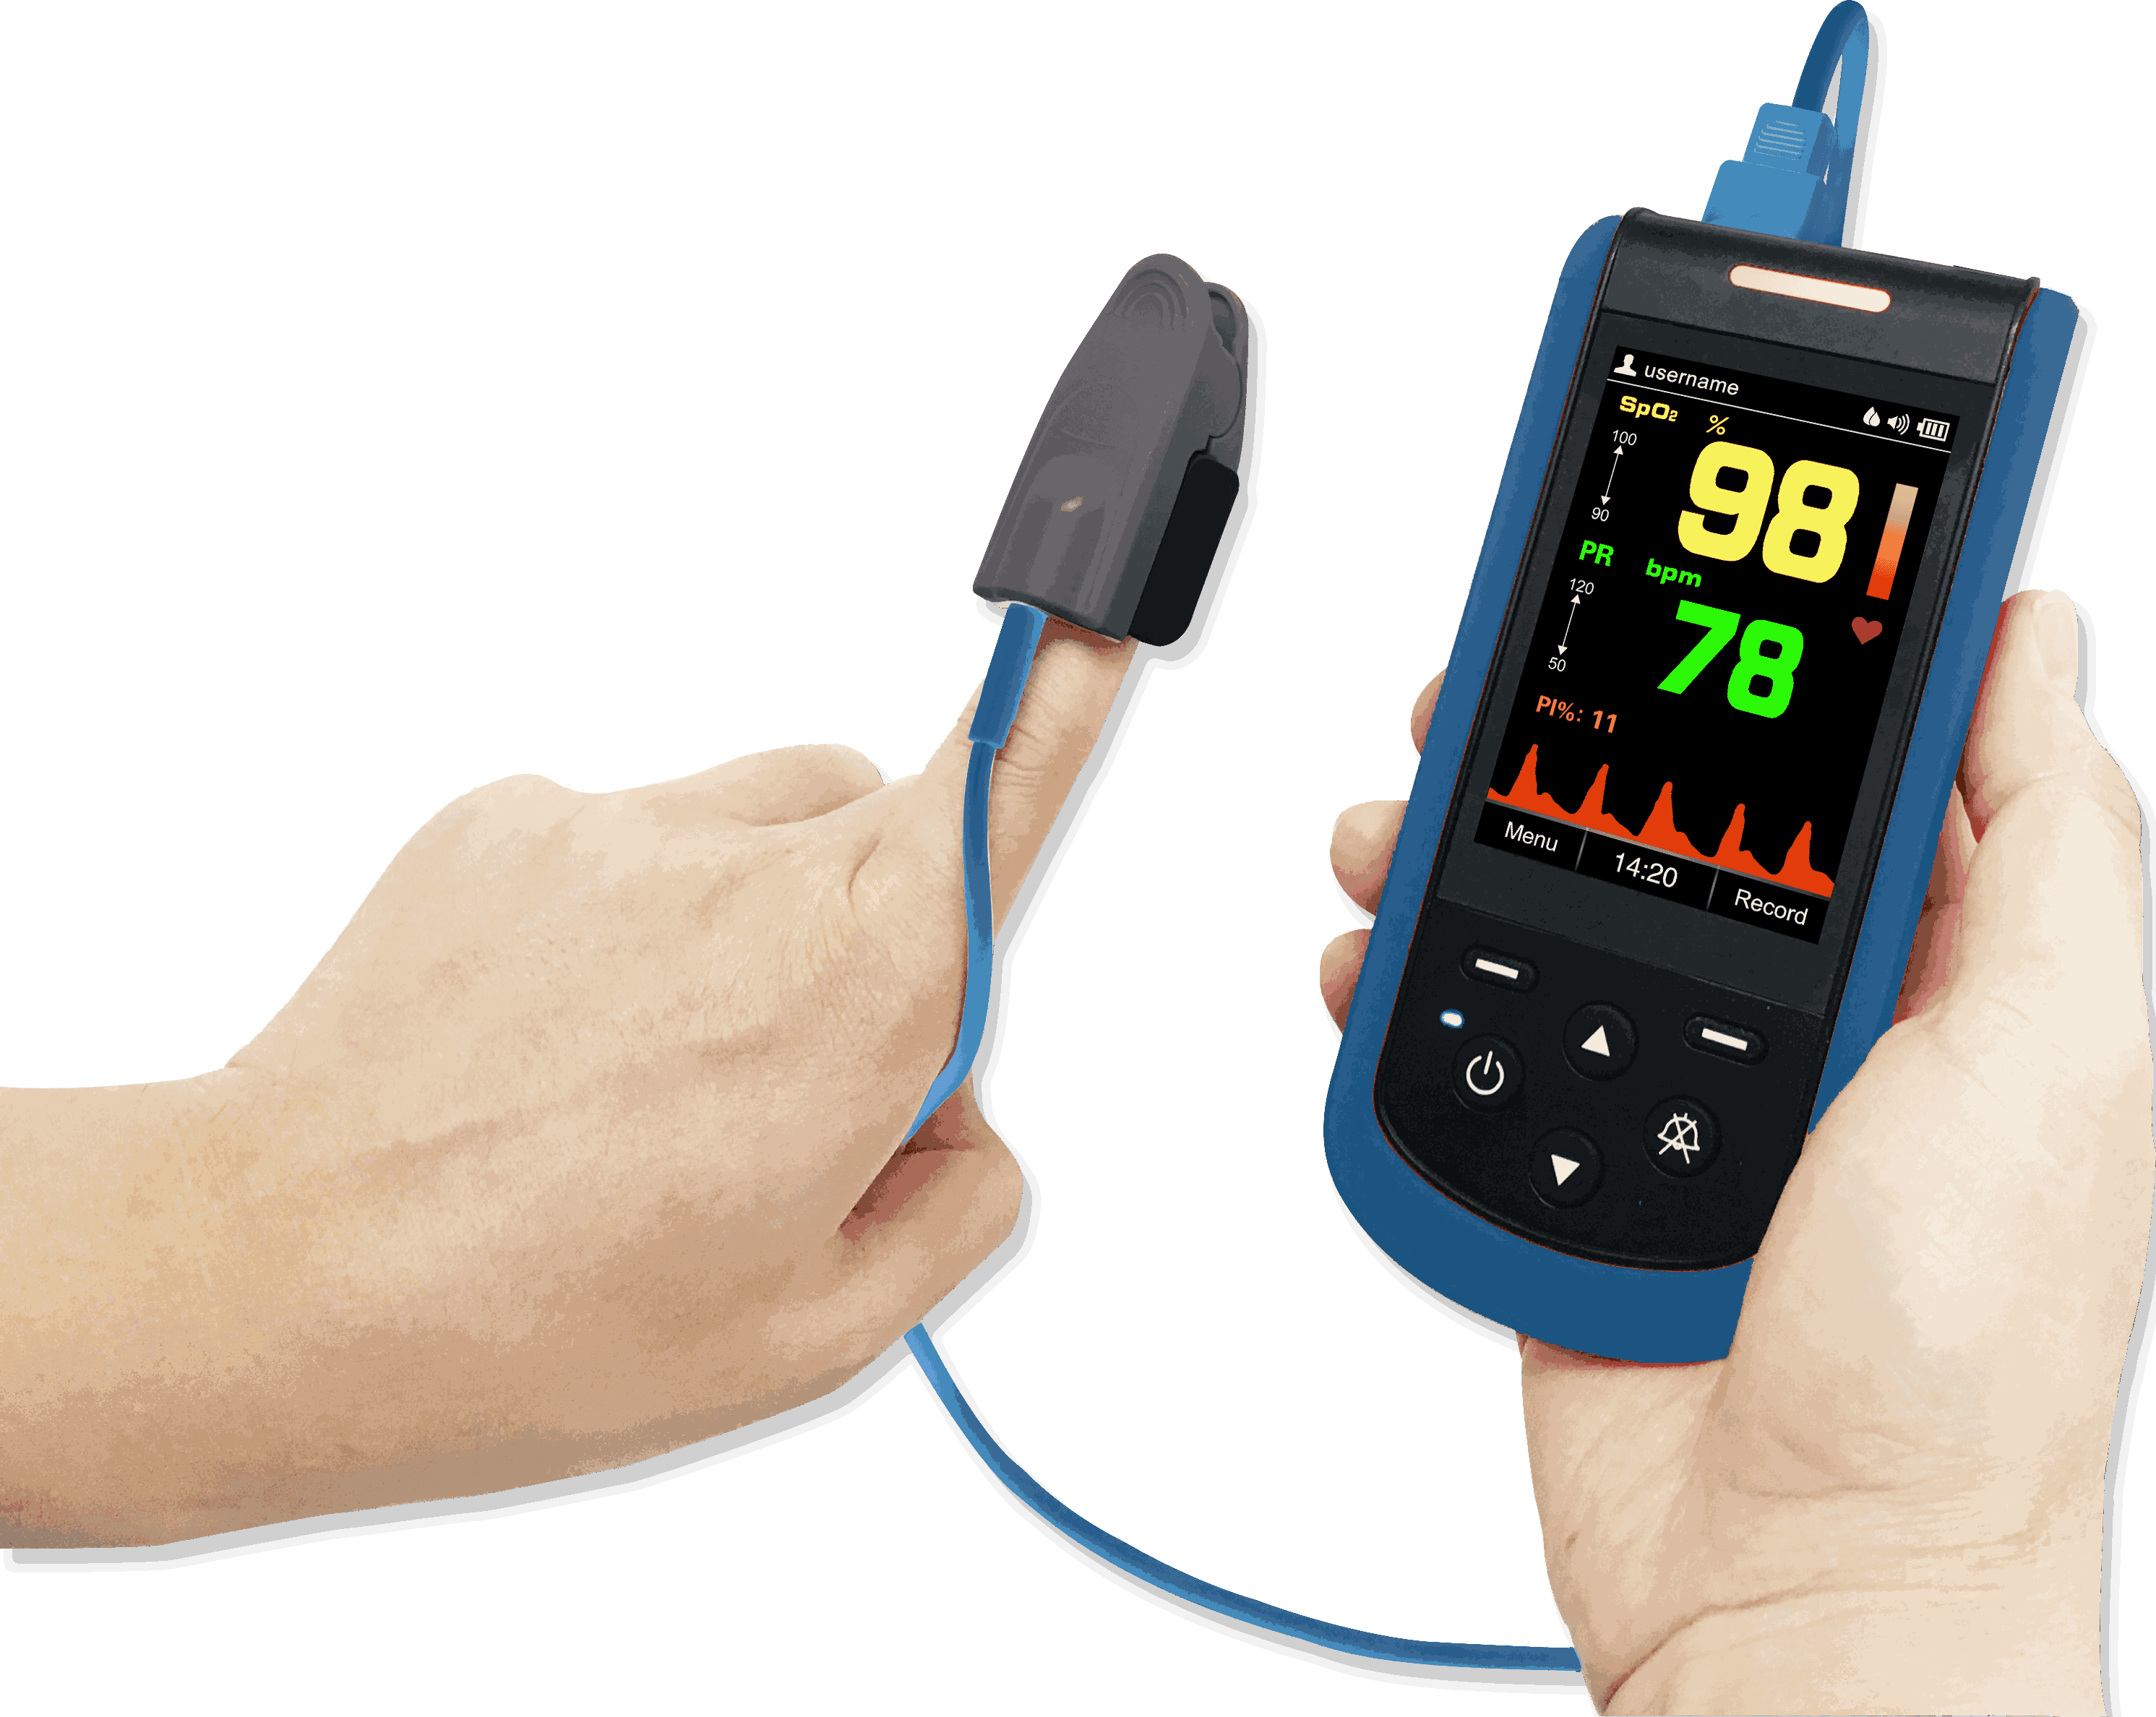 pulse oximeter to detect SpO2 and pulse rate